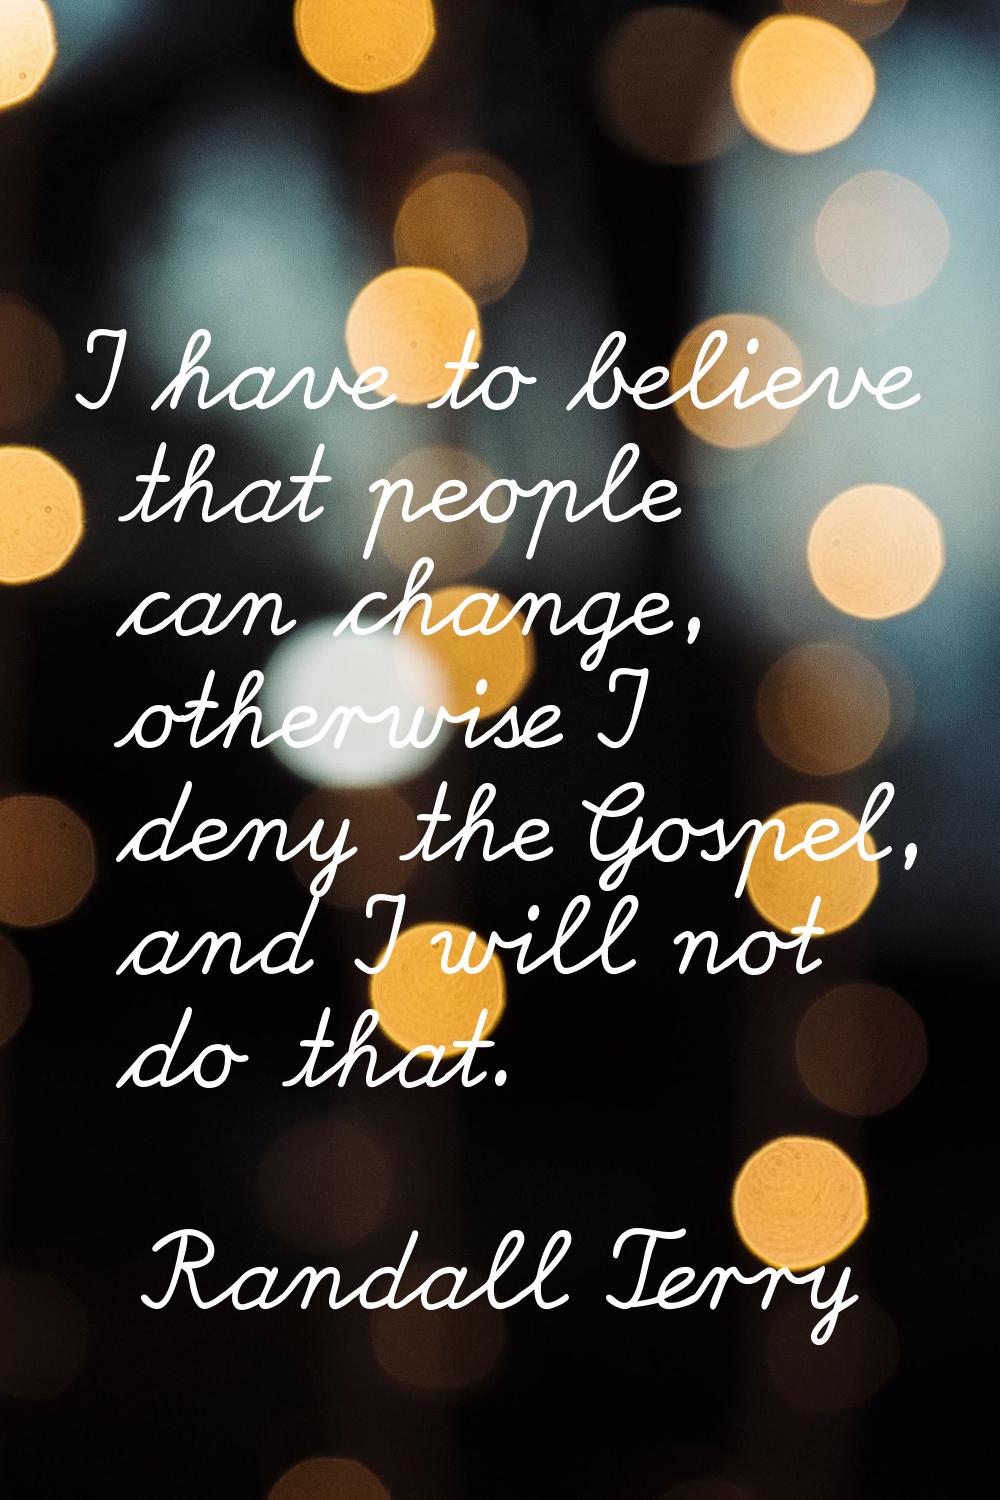 I have to believe that people can change, otherwise I deny the Gospel, and I will not do that.